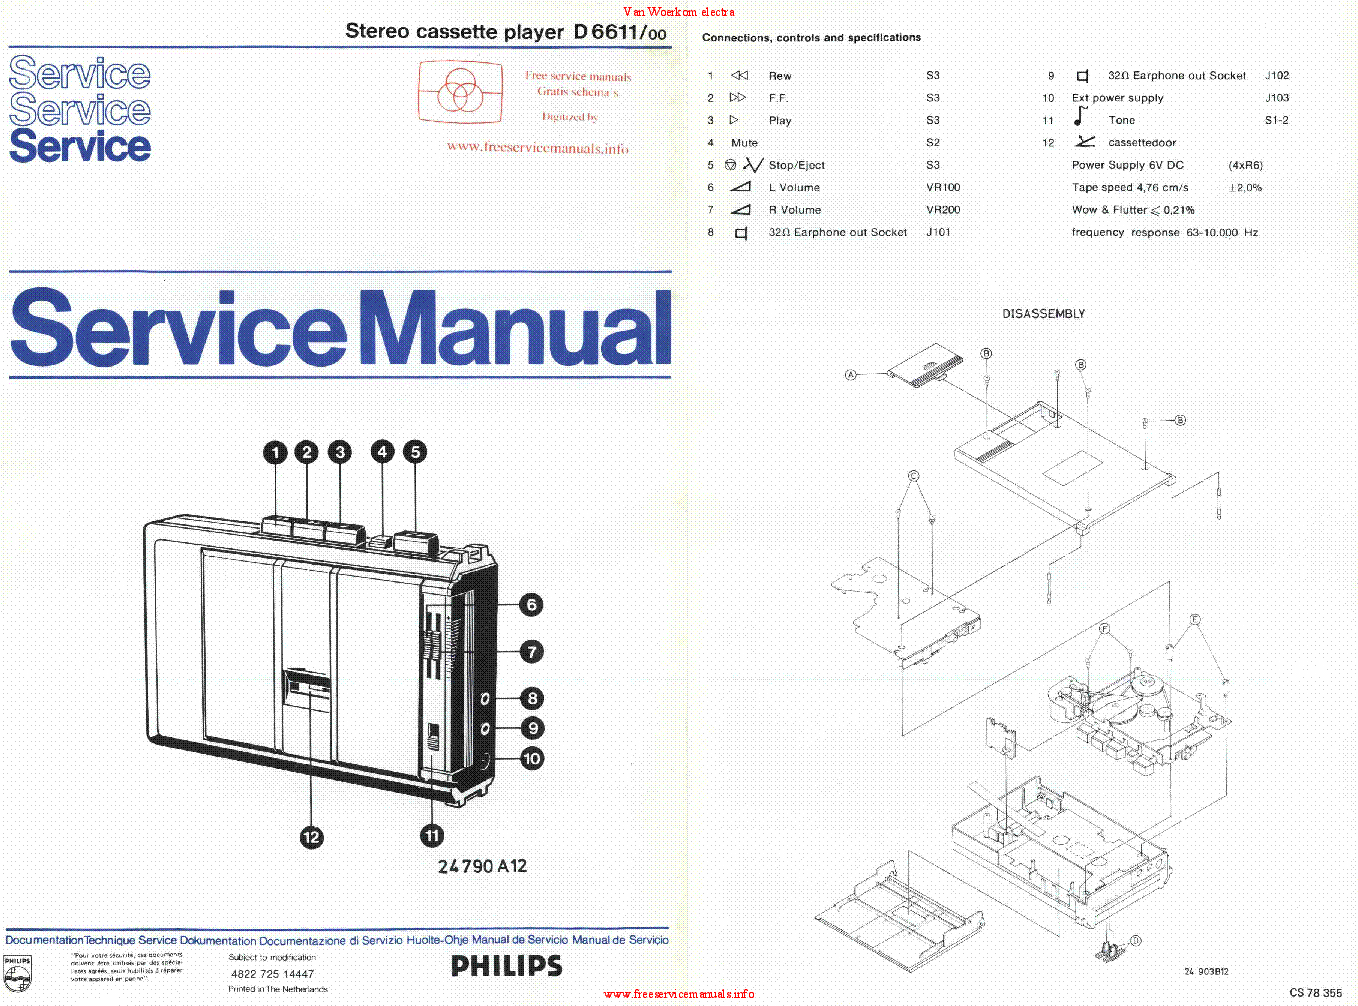 PHILIPS D6611 service manual (1st page)